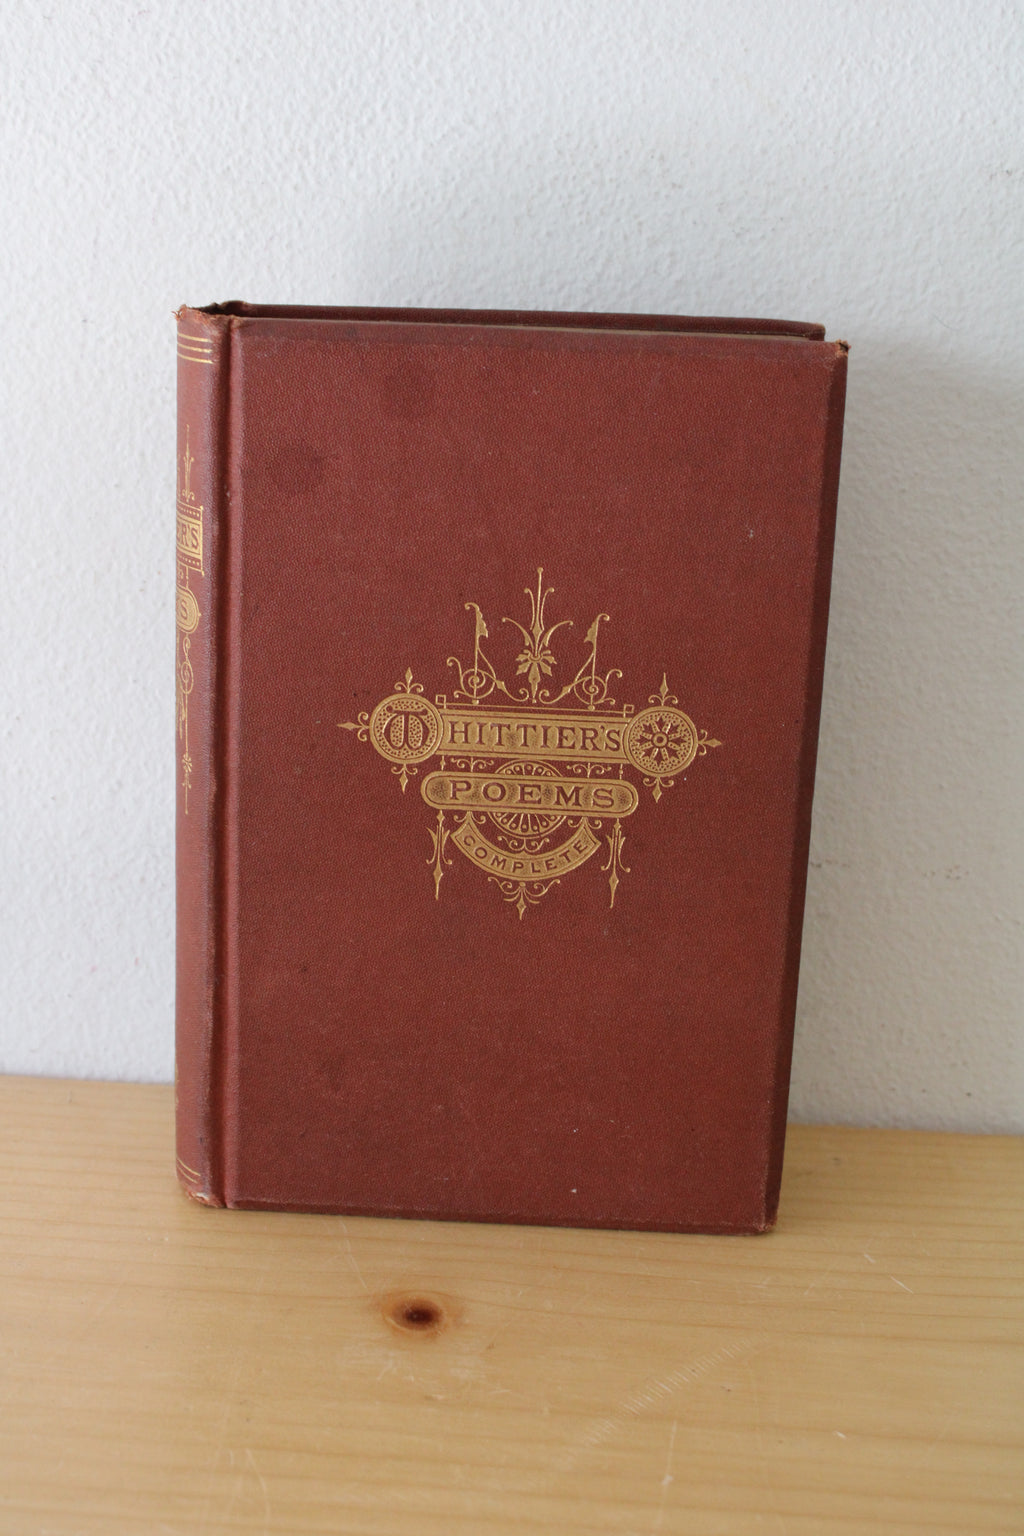 Whittier's Poems (Complete) 1880 Edition